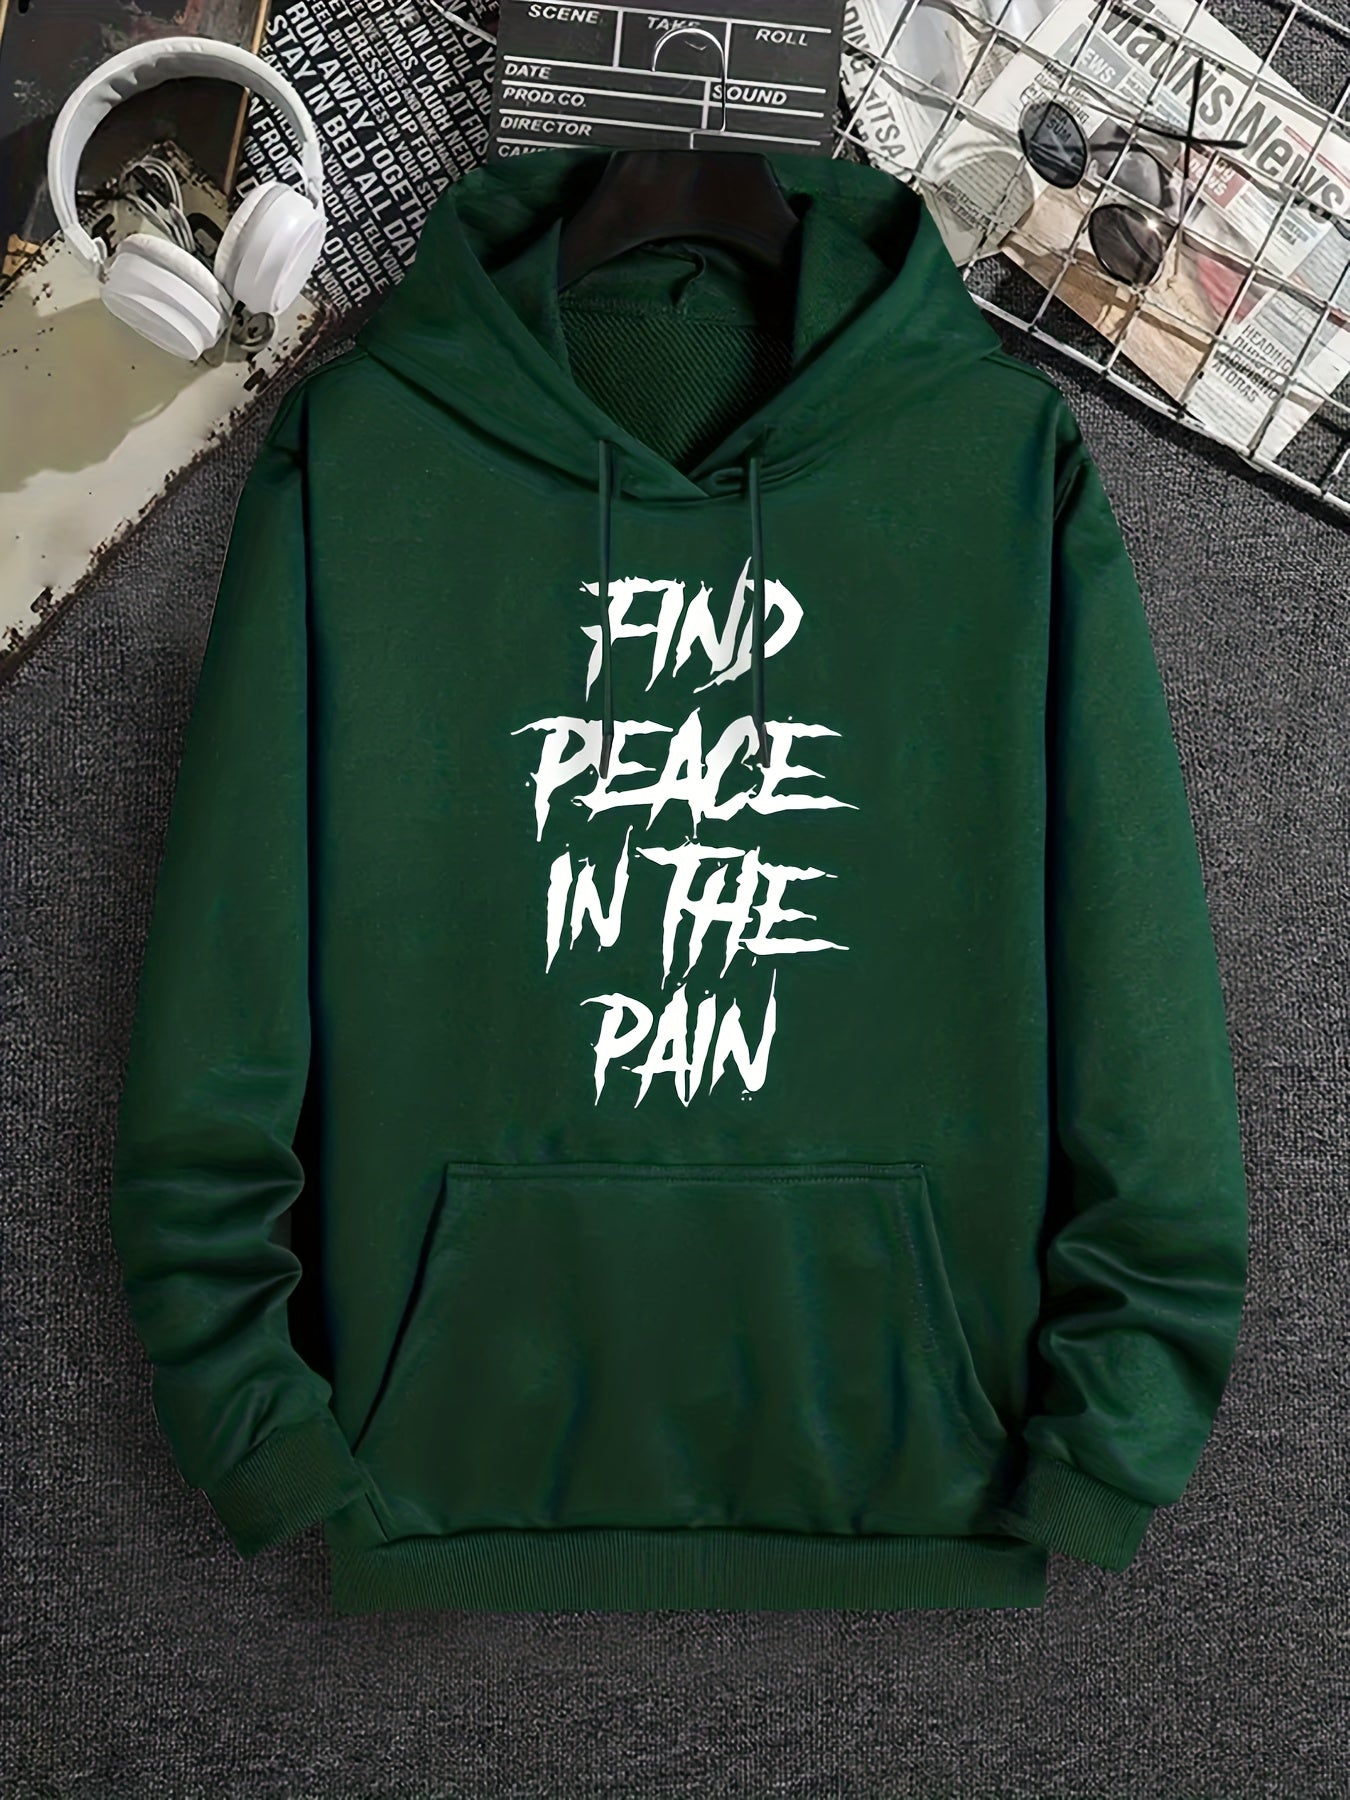 FIND PEACE IN THE PAIN Men's Christian Pullover Hooded Sweatshirt claimedbygoddesigns